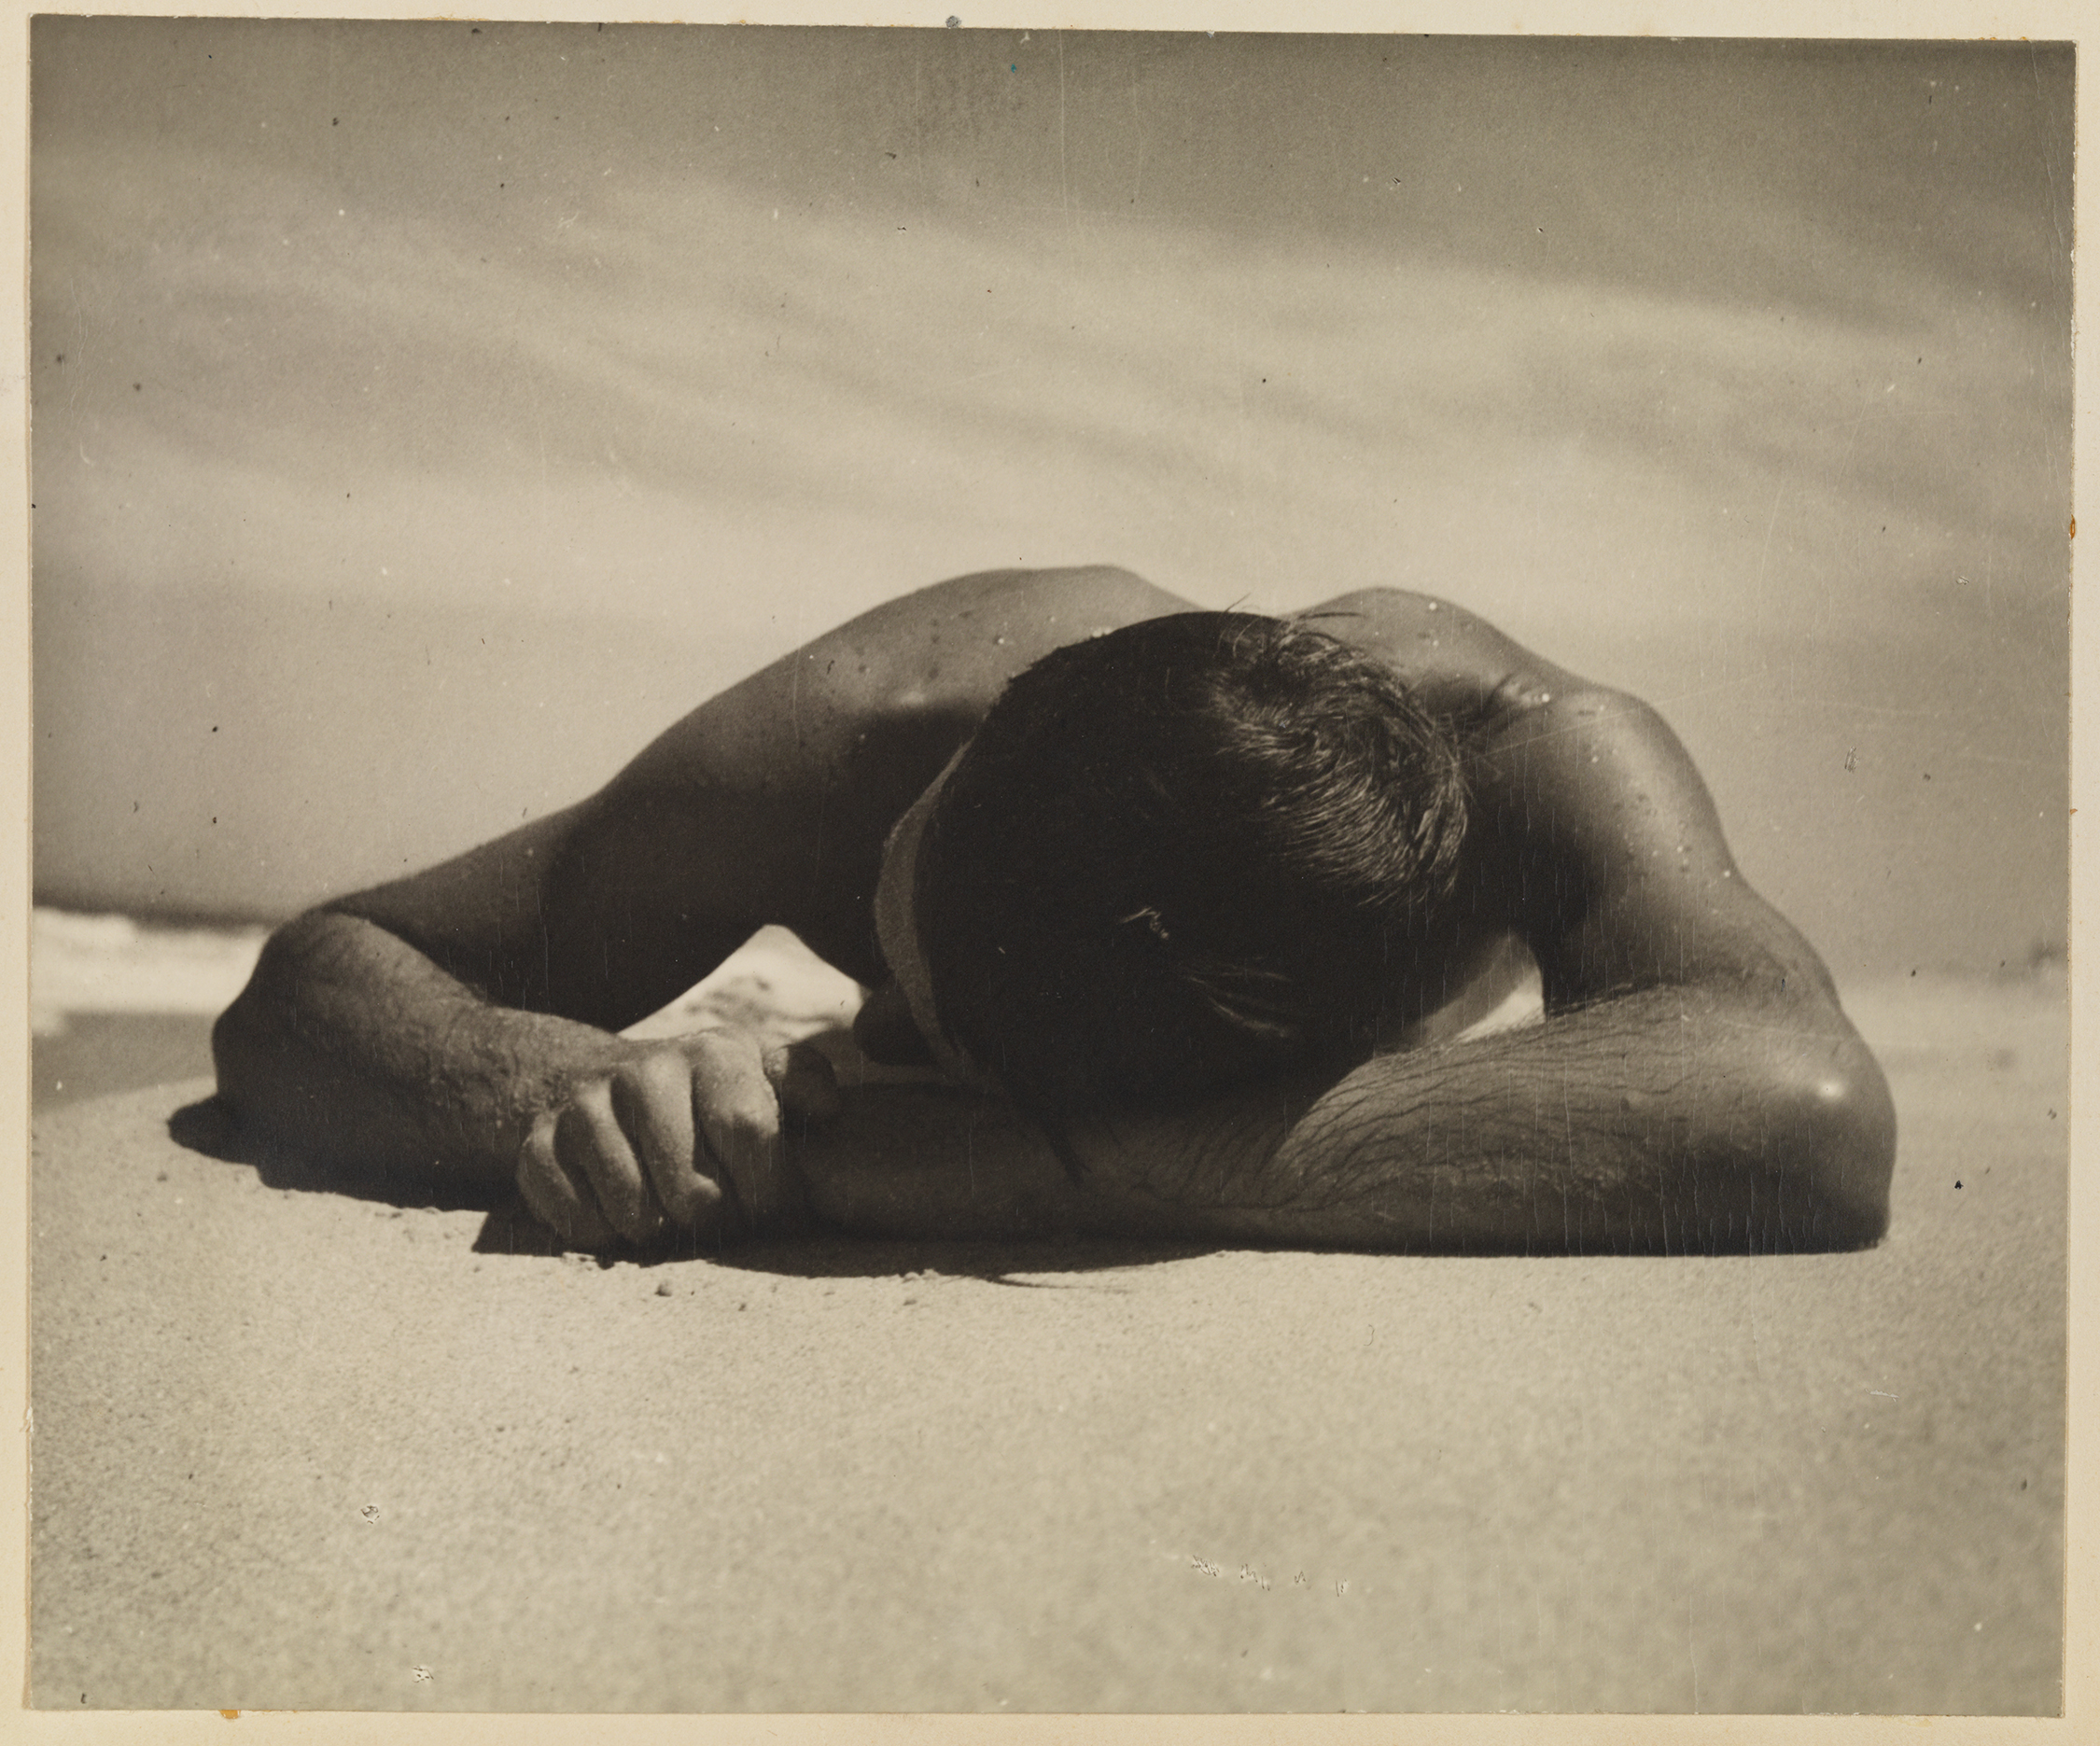 A sepia photograph of a man lying on a beach, covered in droplets of water